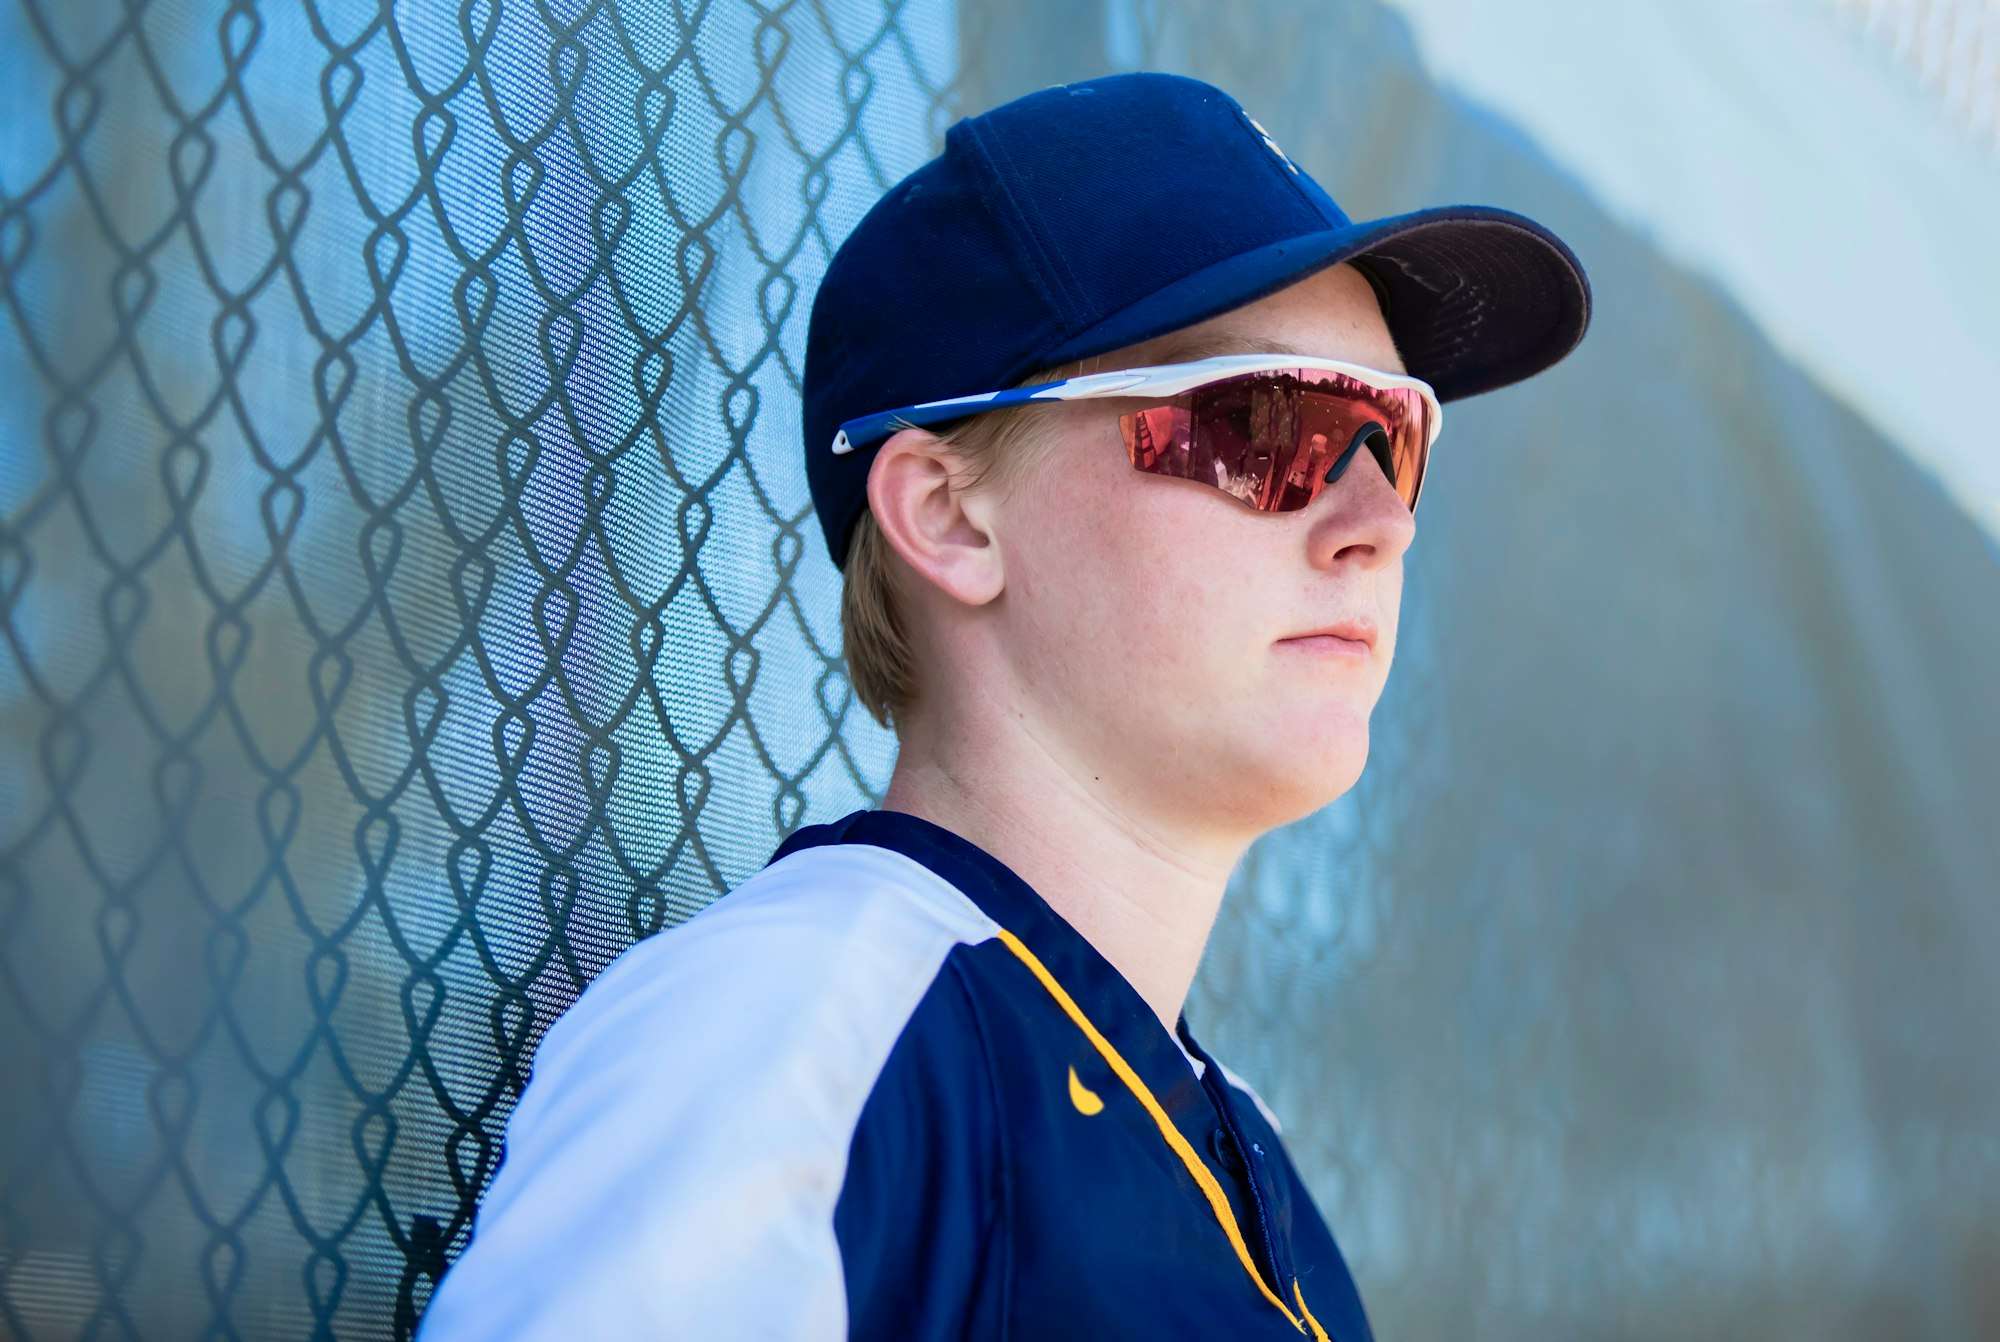 High school baseball player leaning against the fence wearing cap and sunglasses